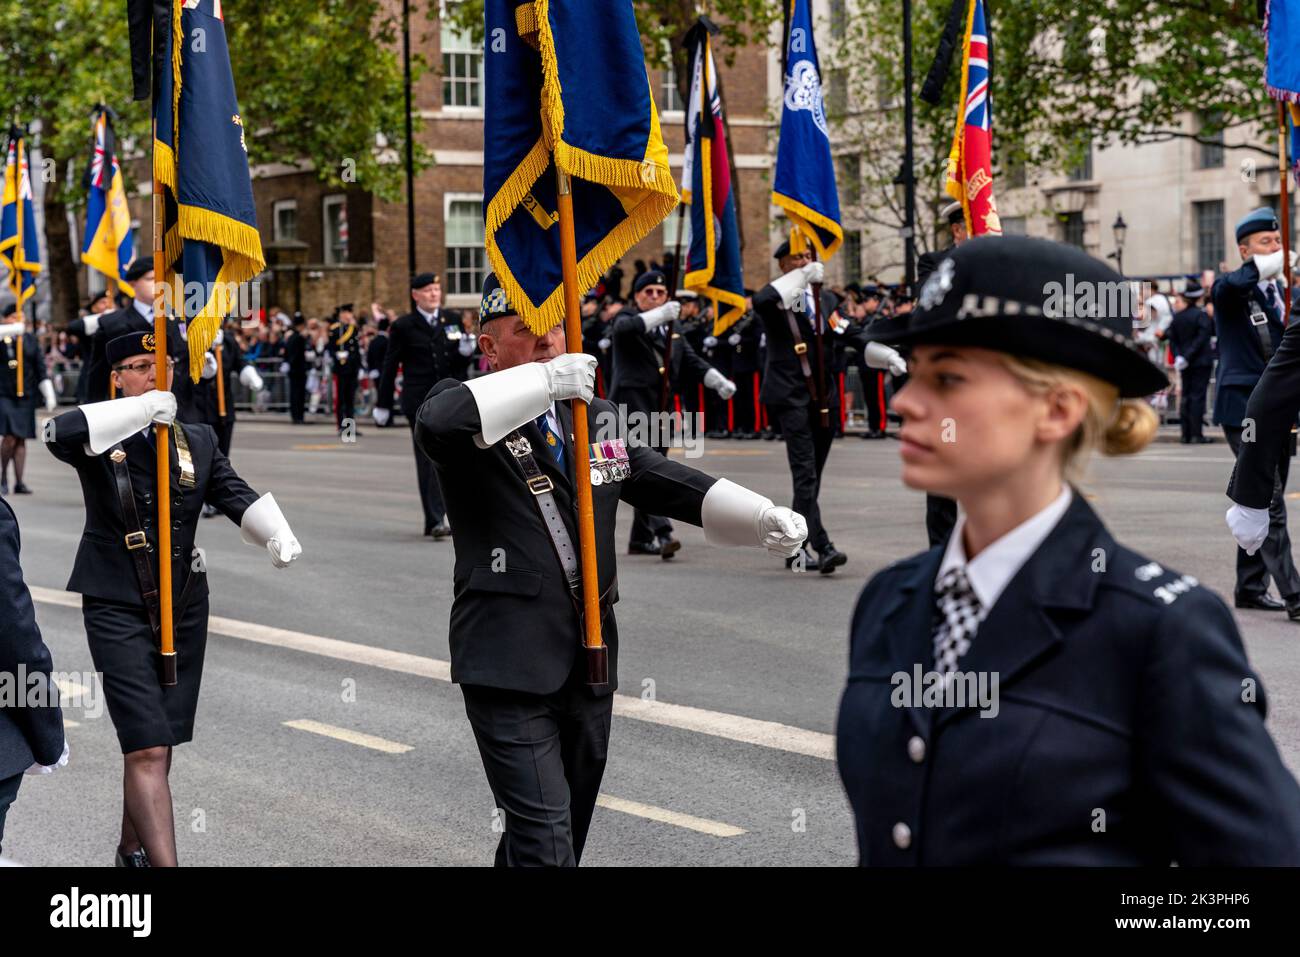 The Royal British Legion March Down Whitehall To Take Part In The Queen Elizabeth II Funeral Procession, London, UK. Stock Photo